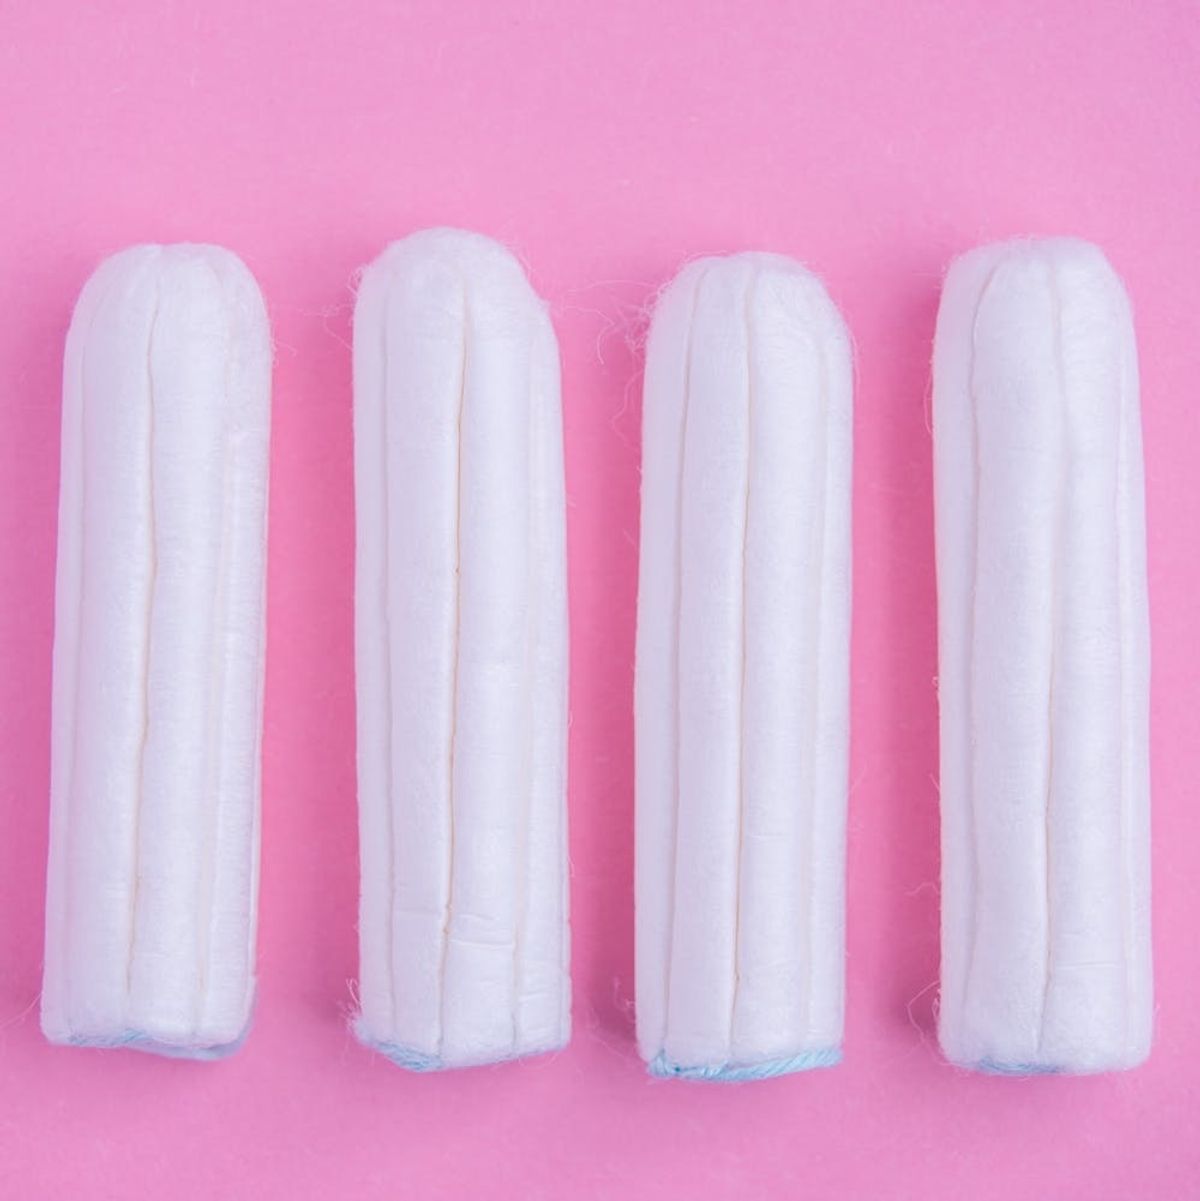 Arizona Women Sent Pads and Tampons to Their State Rep to Stand Up For Women in Prison